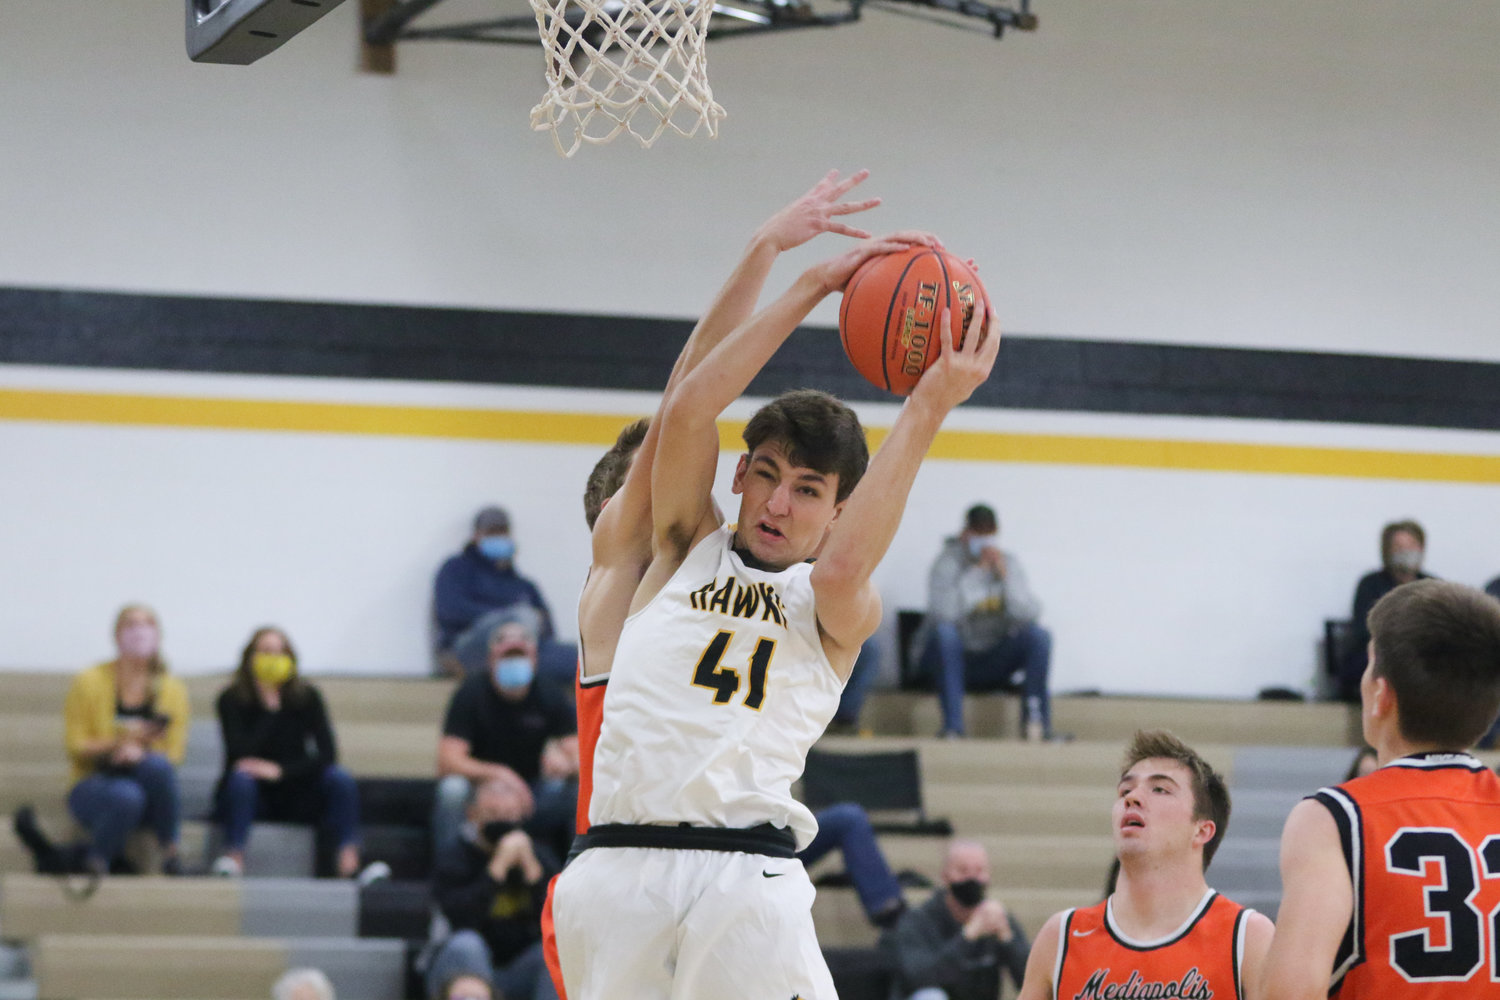 Mid-Prairie forward Ethan Kos grabs a rebound during the first quarter of a scrimmage with Mediapolis in Wellman on Saturday, November 21.